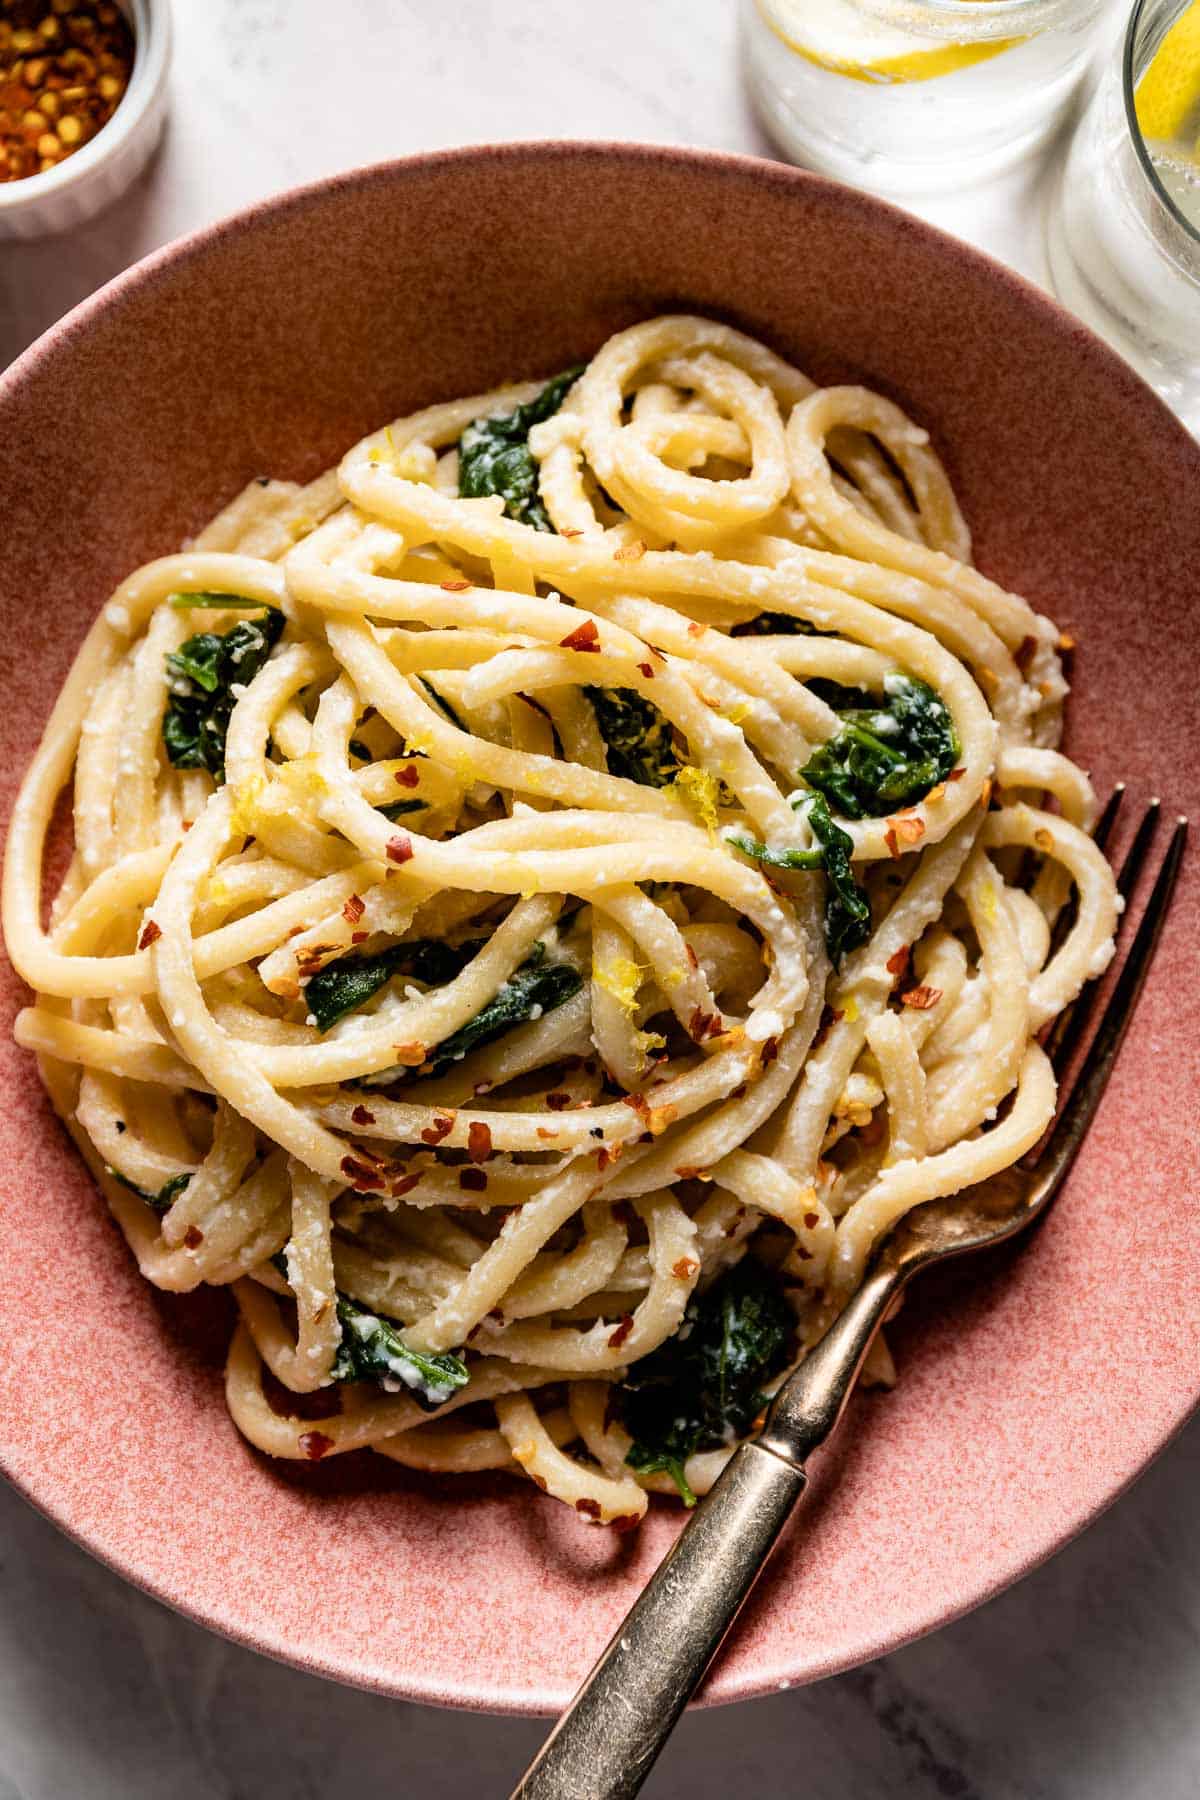 Ricotta Lemon Pasta with spinach in a bowl from the top view